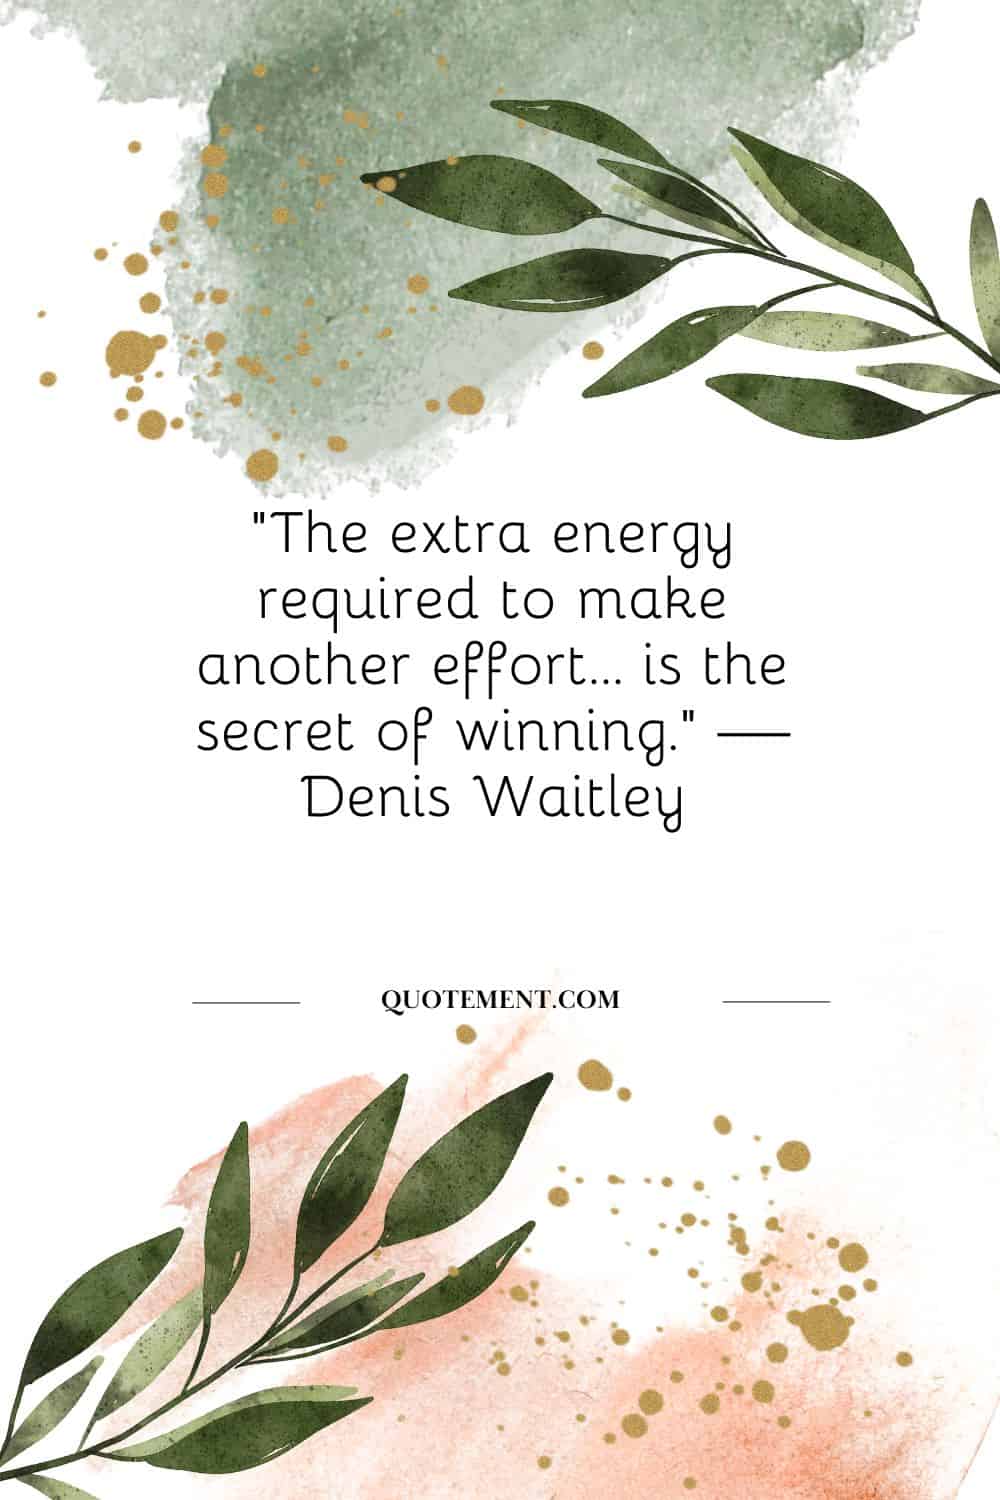 “The extra energy required to make another effort… is the secret of winning.” — Denis Waitley